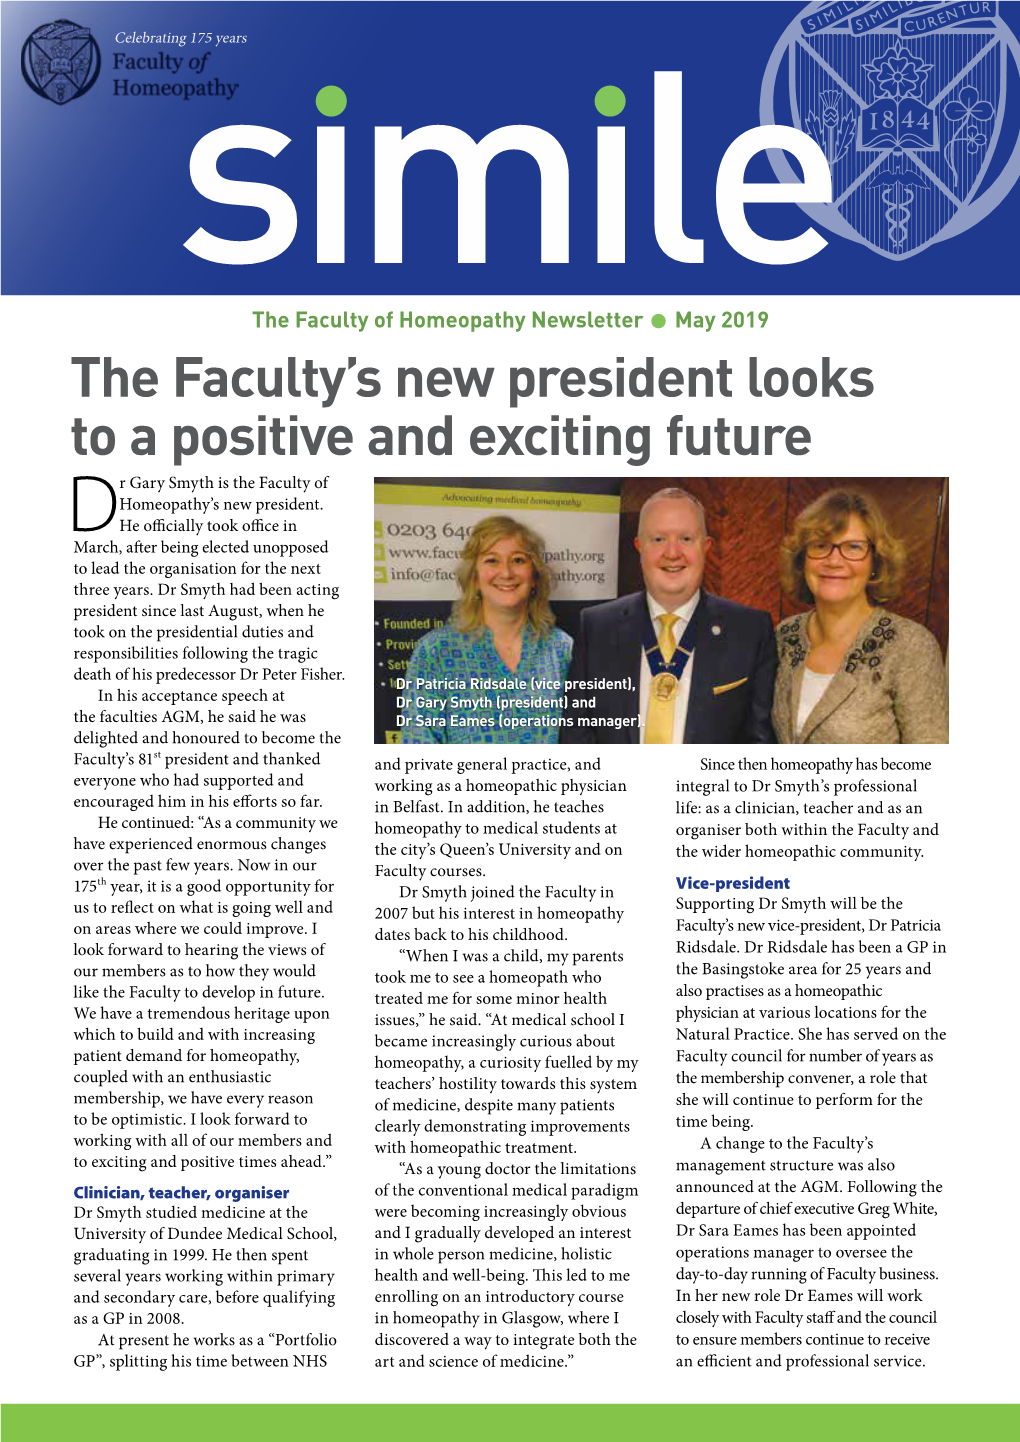 The Faculty's New President Looks to a Positive and Exciting Future